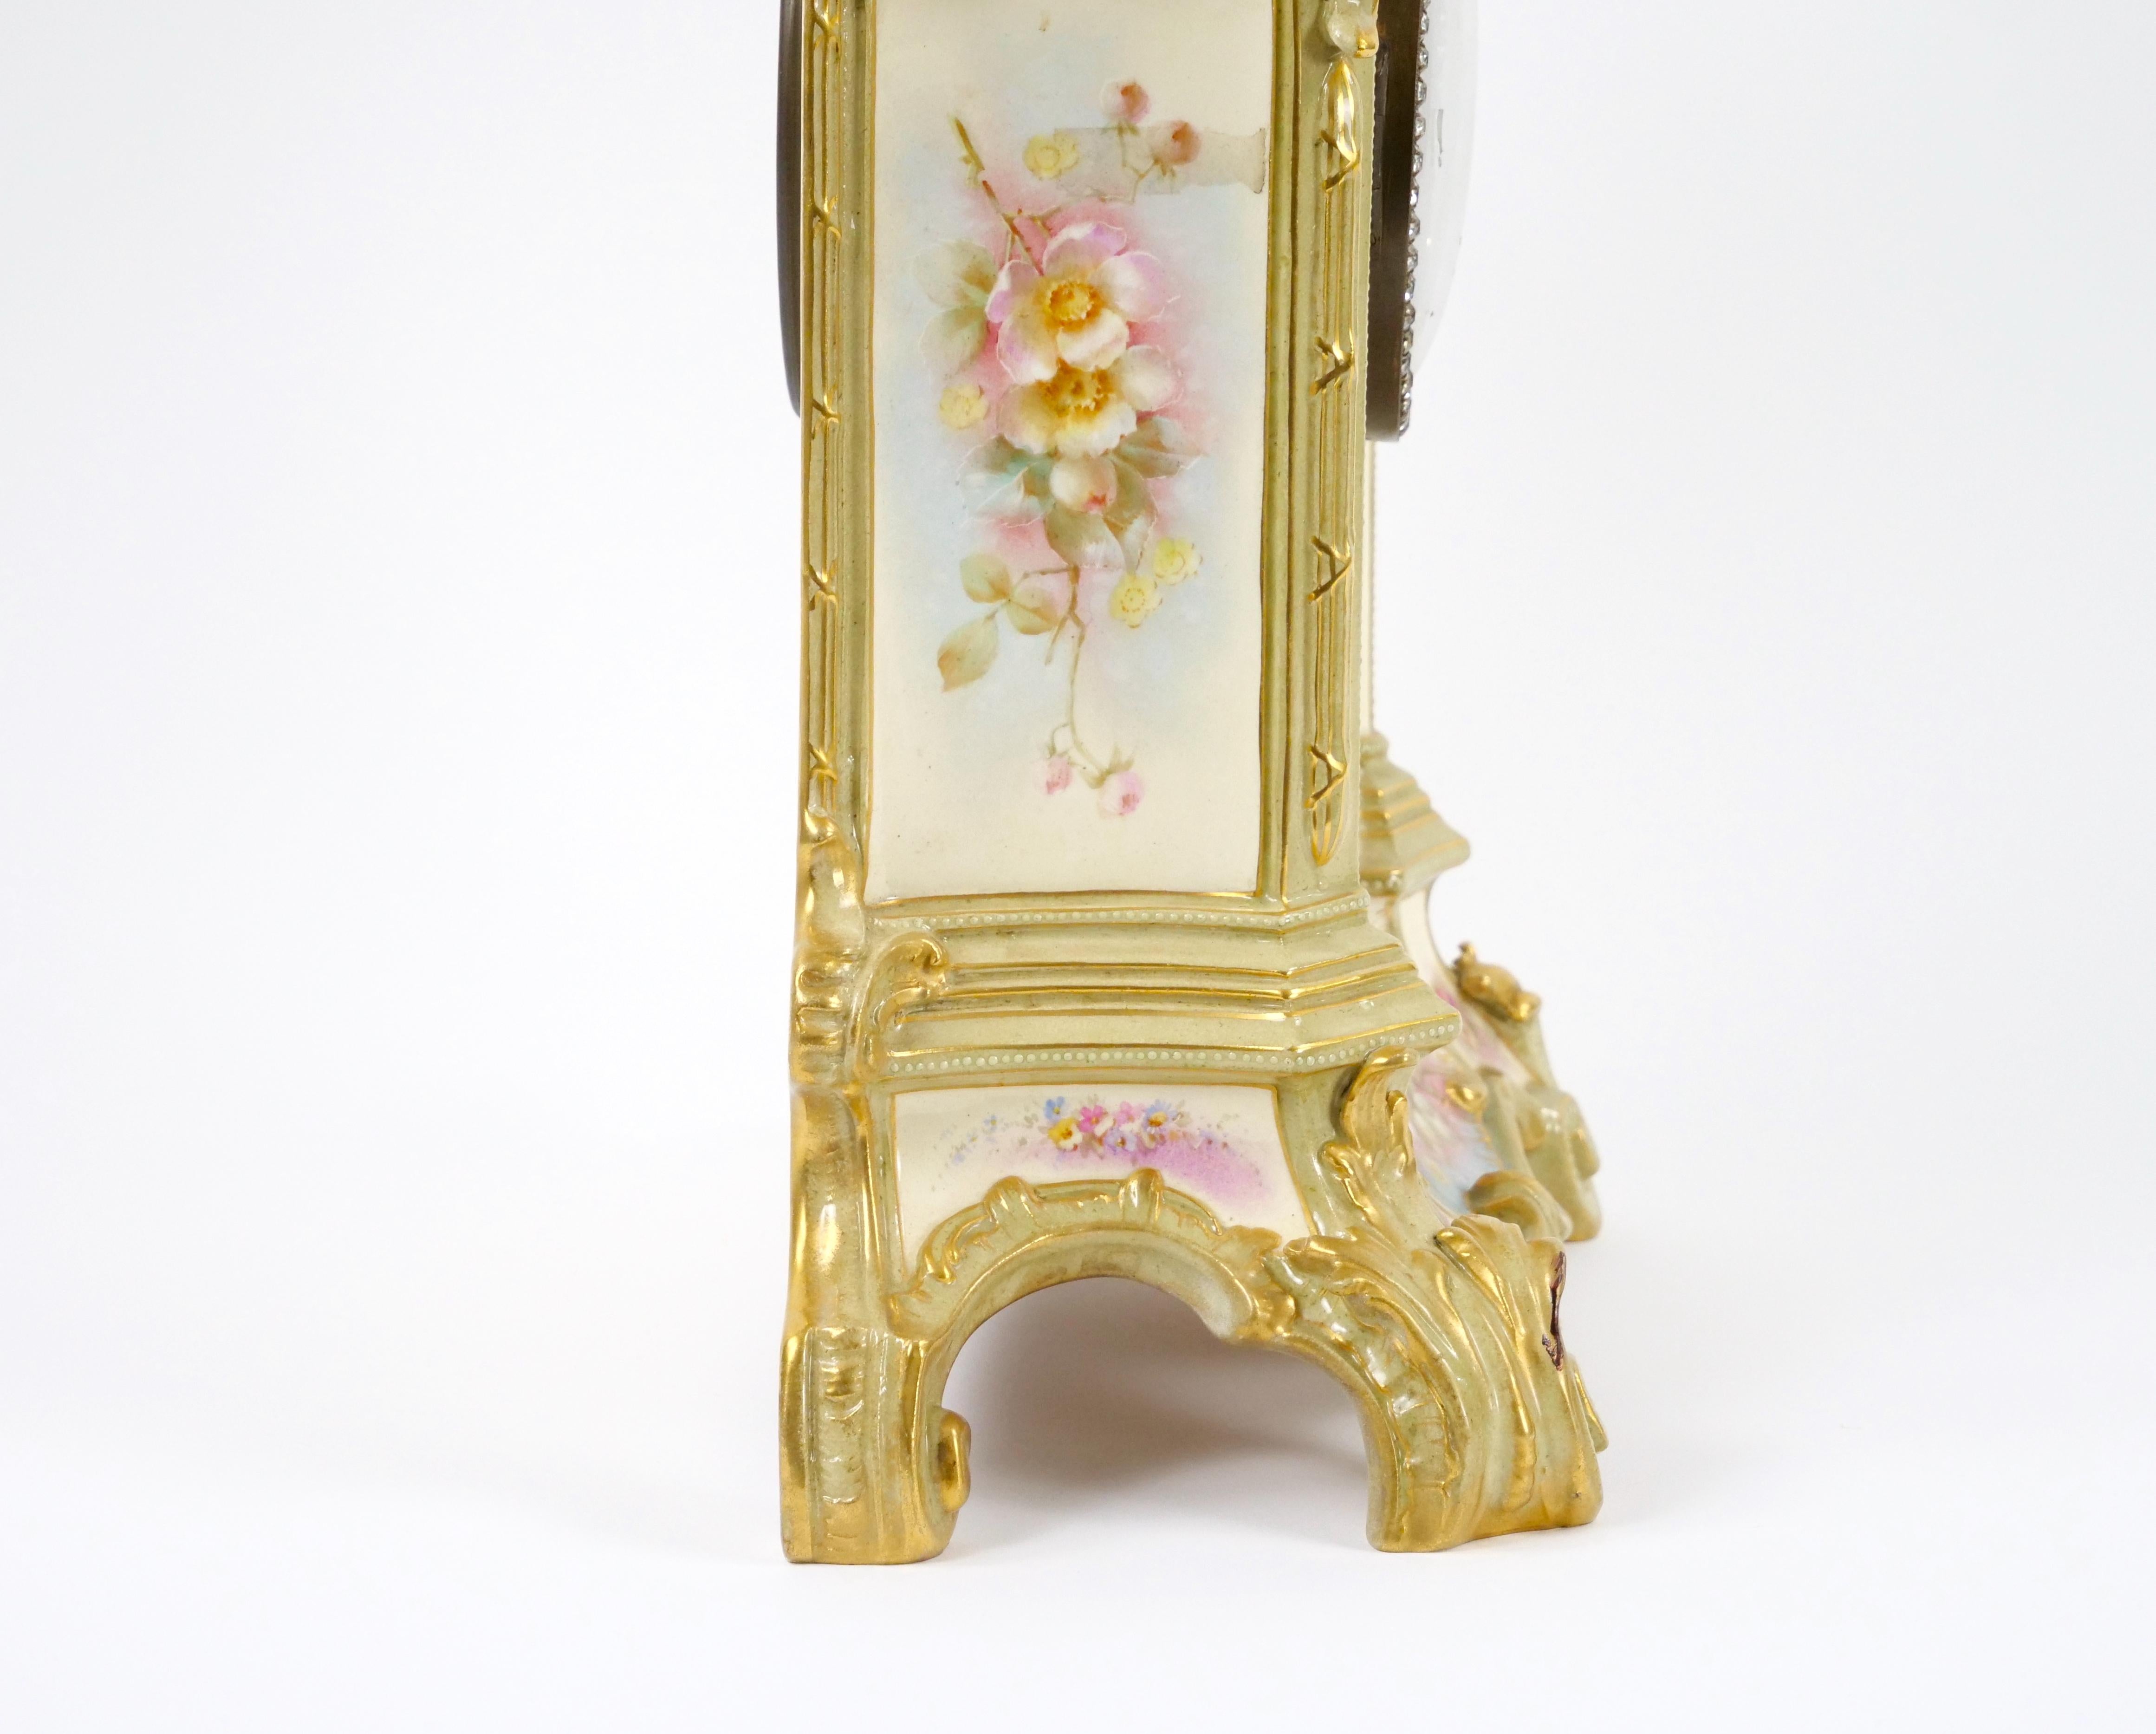 19th Century French Hand Painted/Gilt Decorated Porcelain Mantel Clock 8